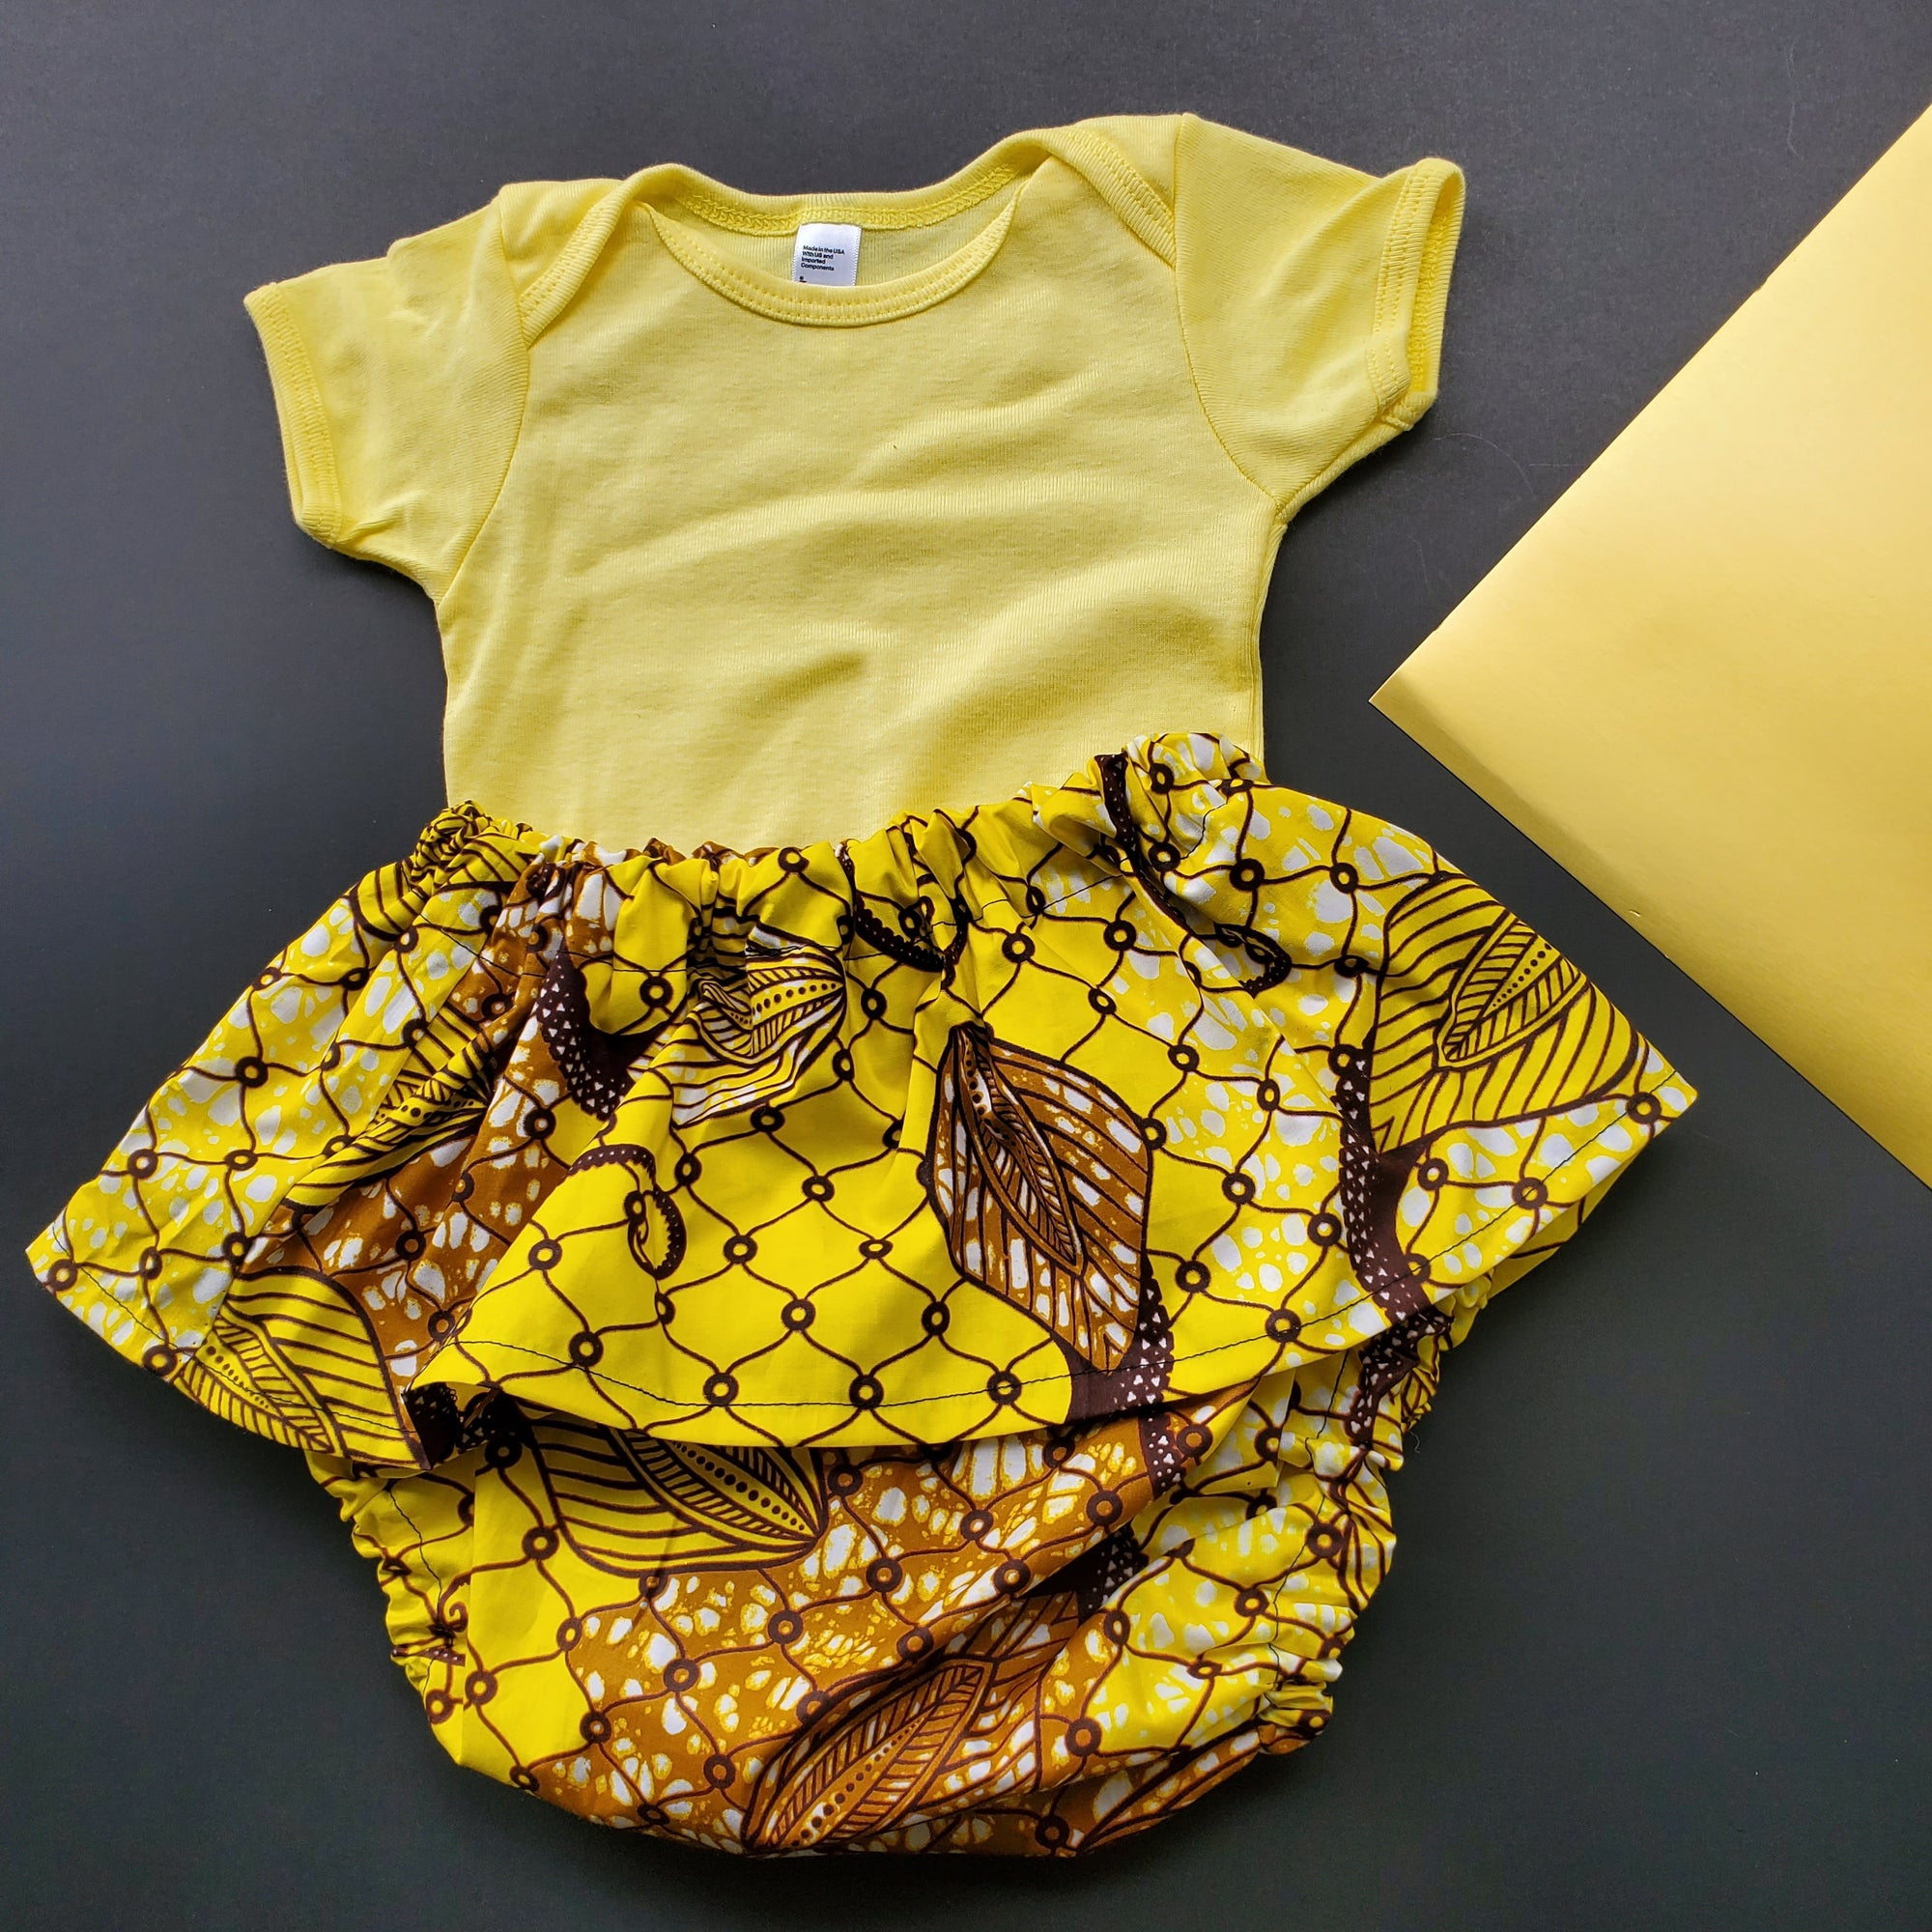 African Print Baby Girl Skirted Bloomers /Diaper Cover - Yellow/Baige/Black Floral Print.